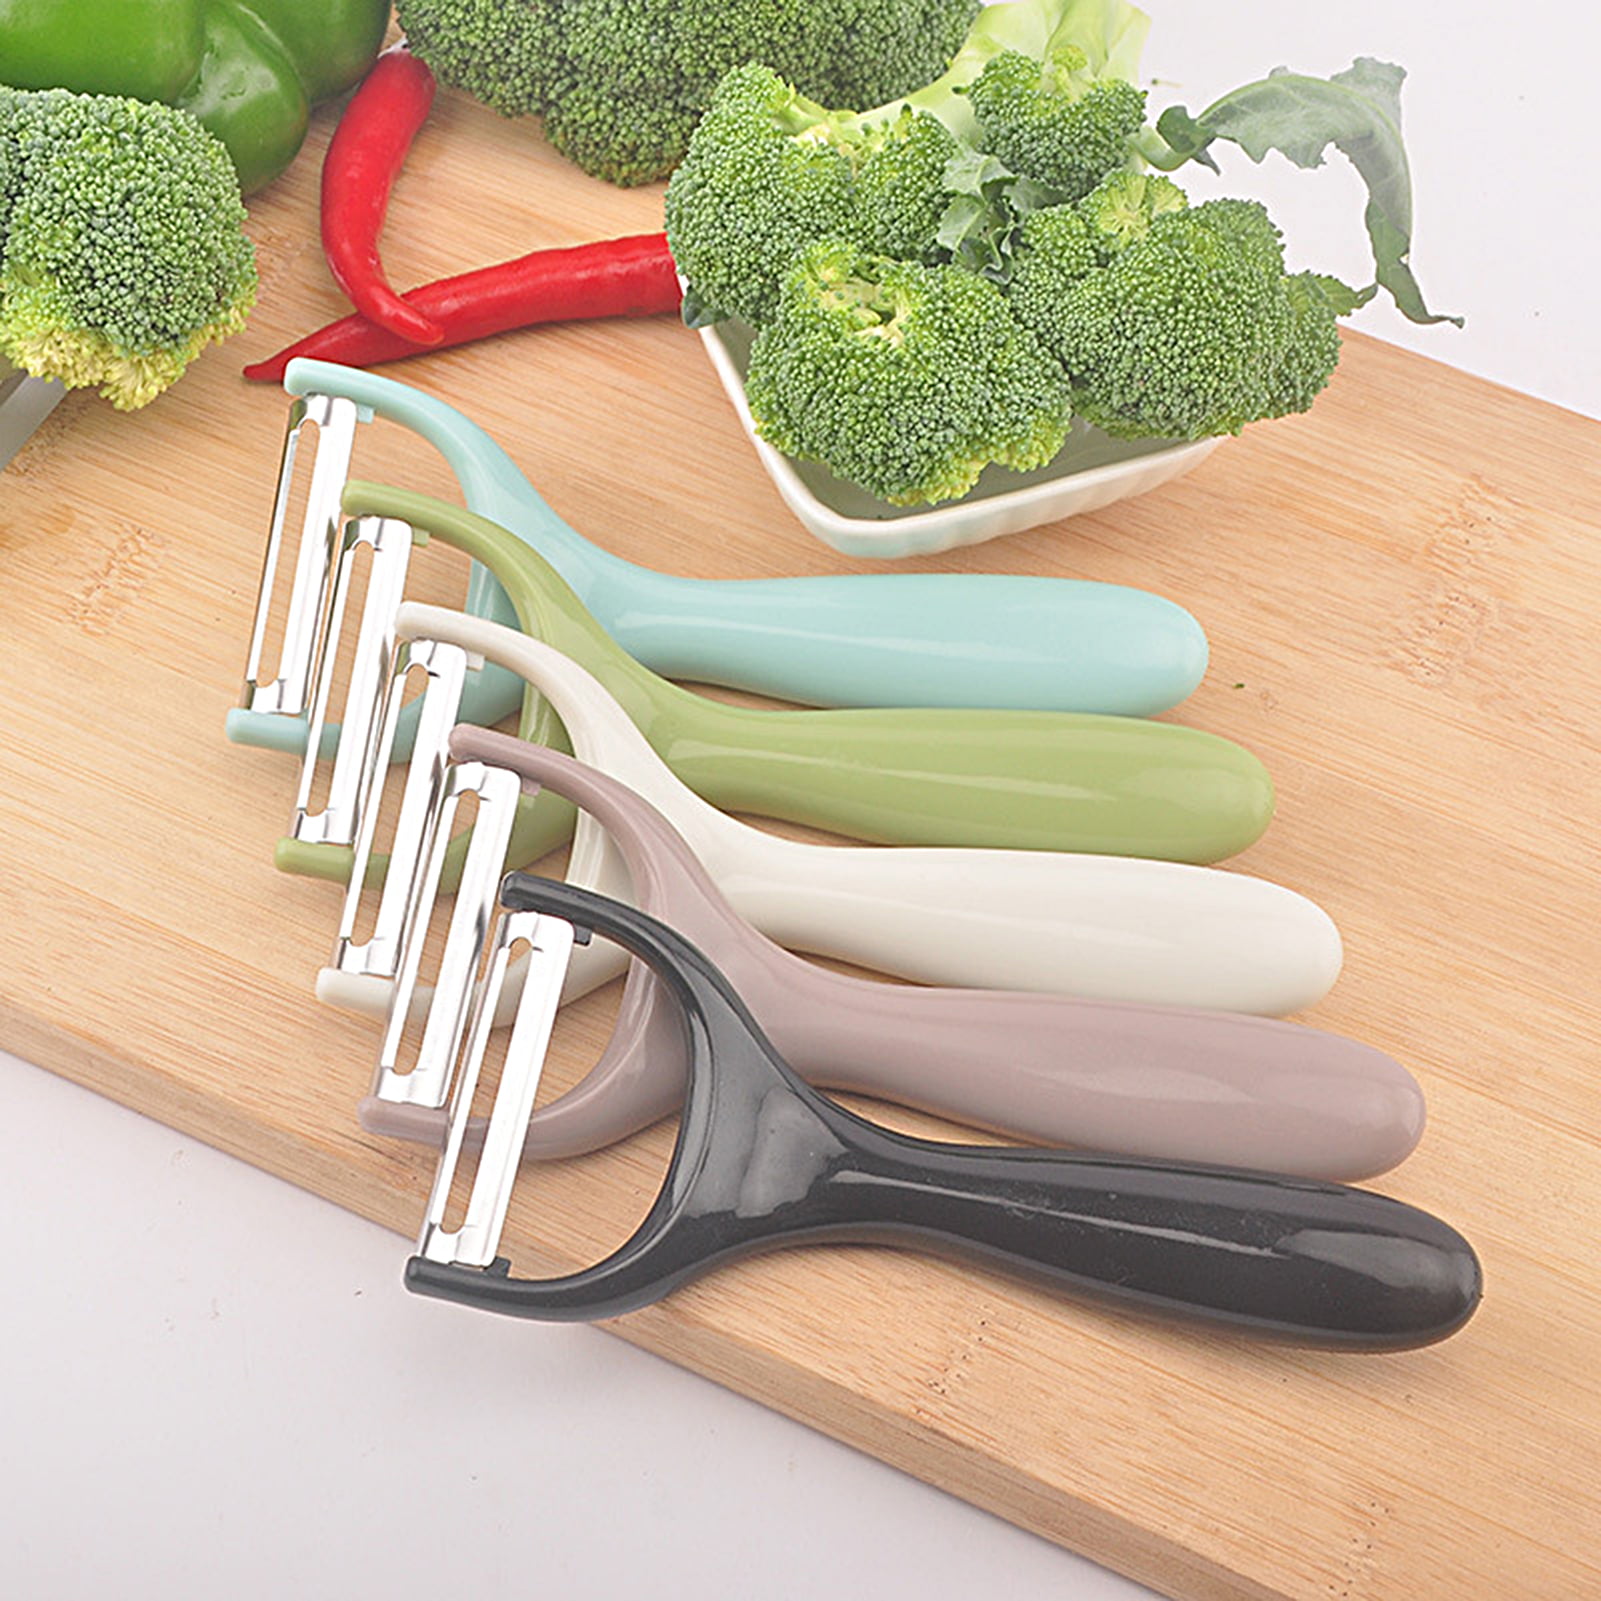 Farfi Peeler Multifunctional with Container Stainless Steel Fruit